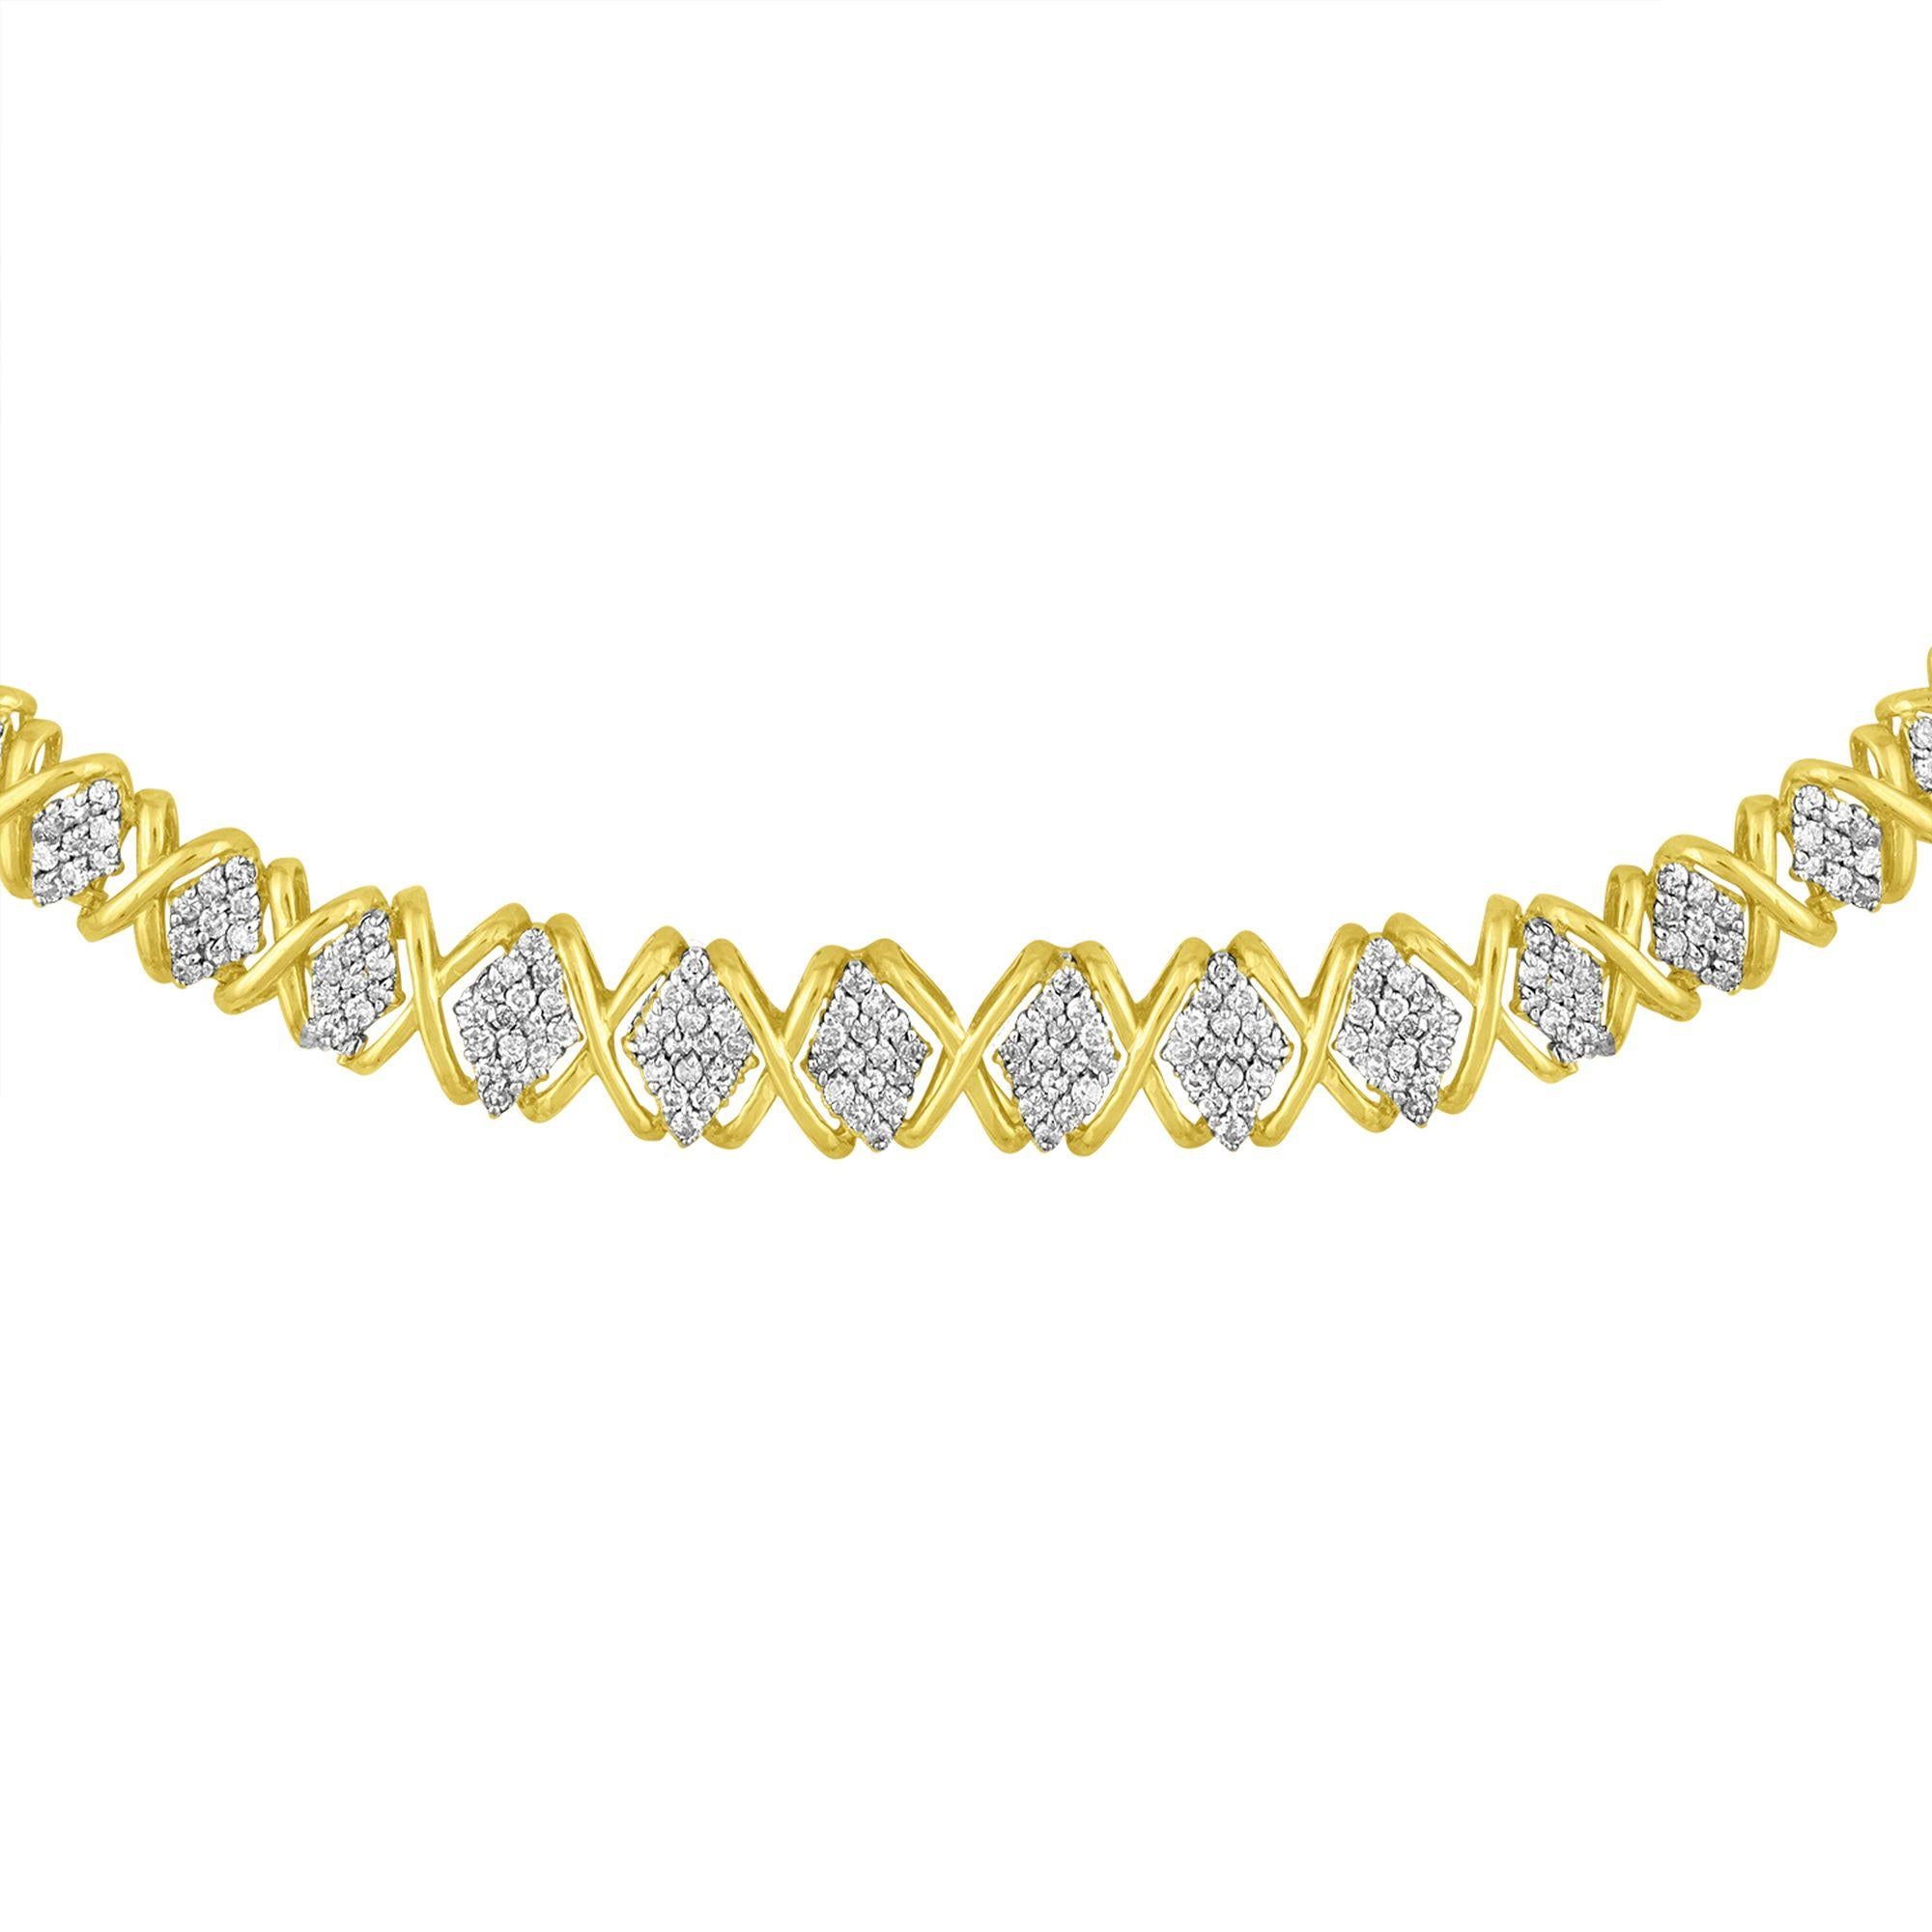 Contemporary 10K Yellow Gold 4.0 Carat Round Diamond Graduating Riviera Statement Necklace For Sale